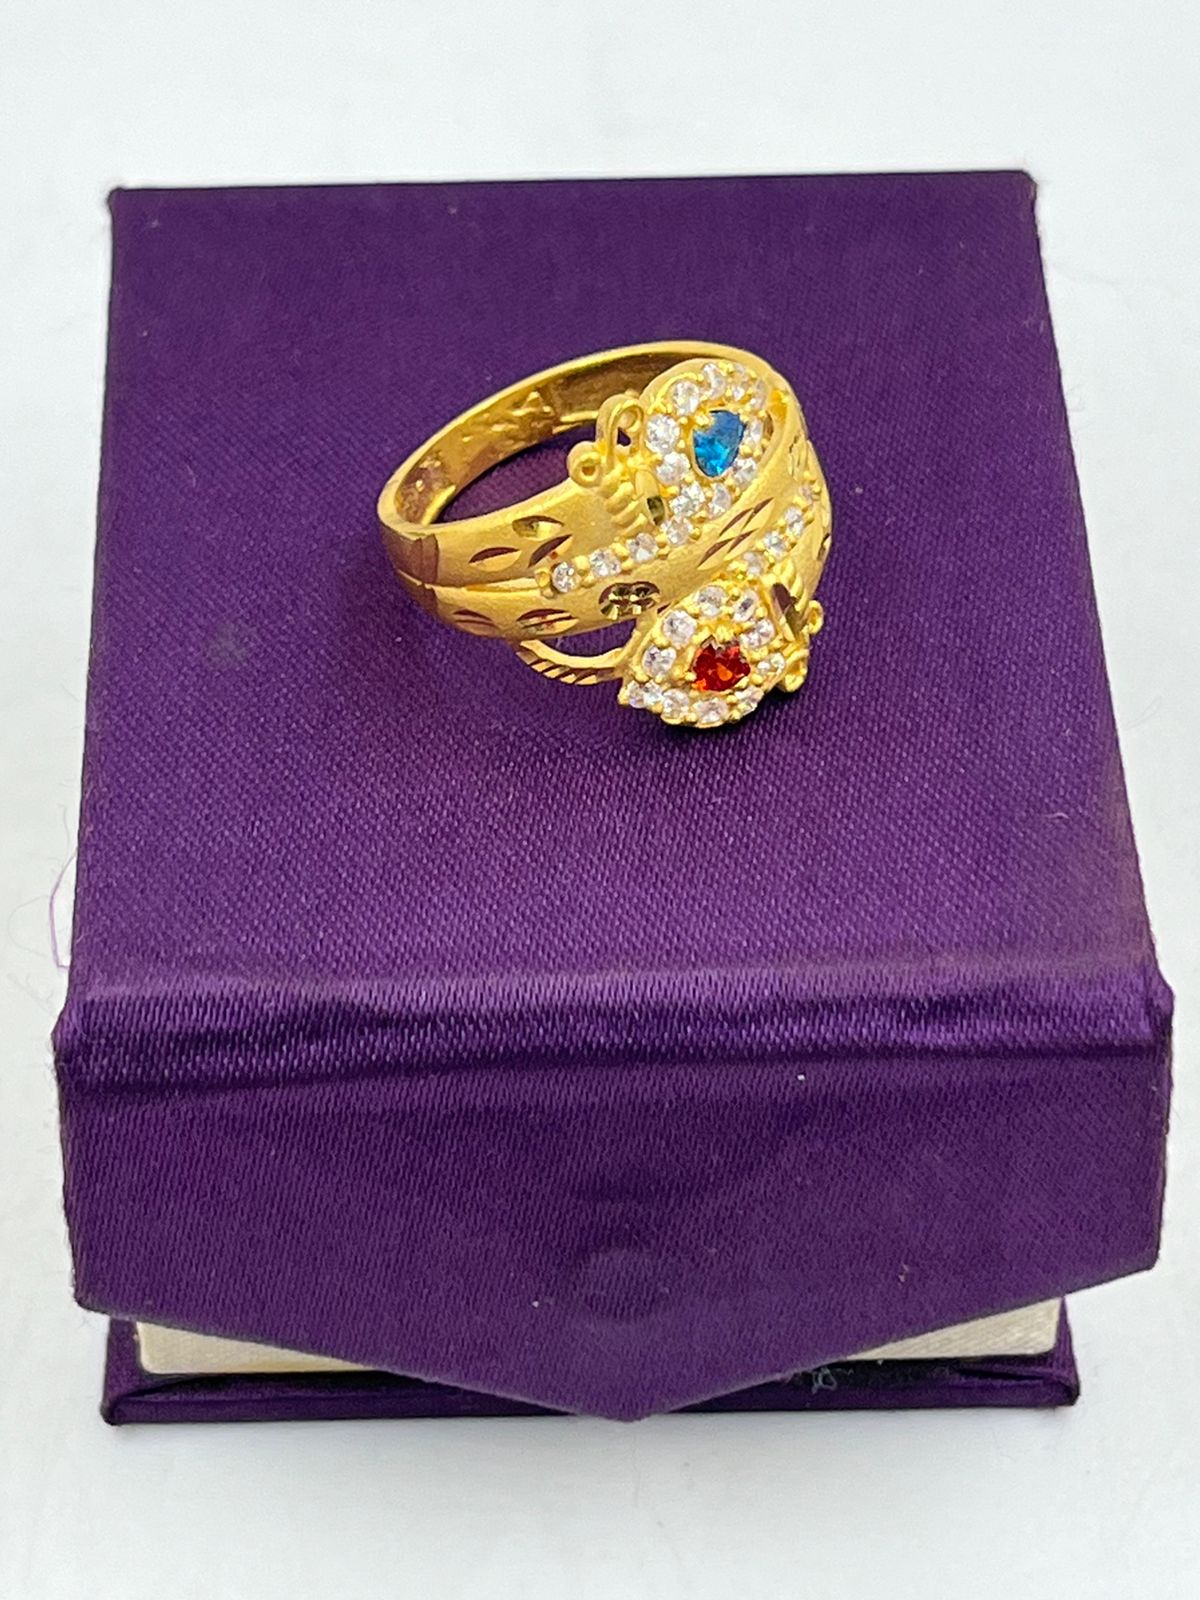 Asp 1 Gram Gold Vanki Ring With Cz & Color Stones – 𝗔𝘀𝗽 𝗙𝗮𝘀𝗵𝗶𝗼𝗻  𝗝𝗲𝘄𝗲𝗹𝗹𝗲𝗿𝘆